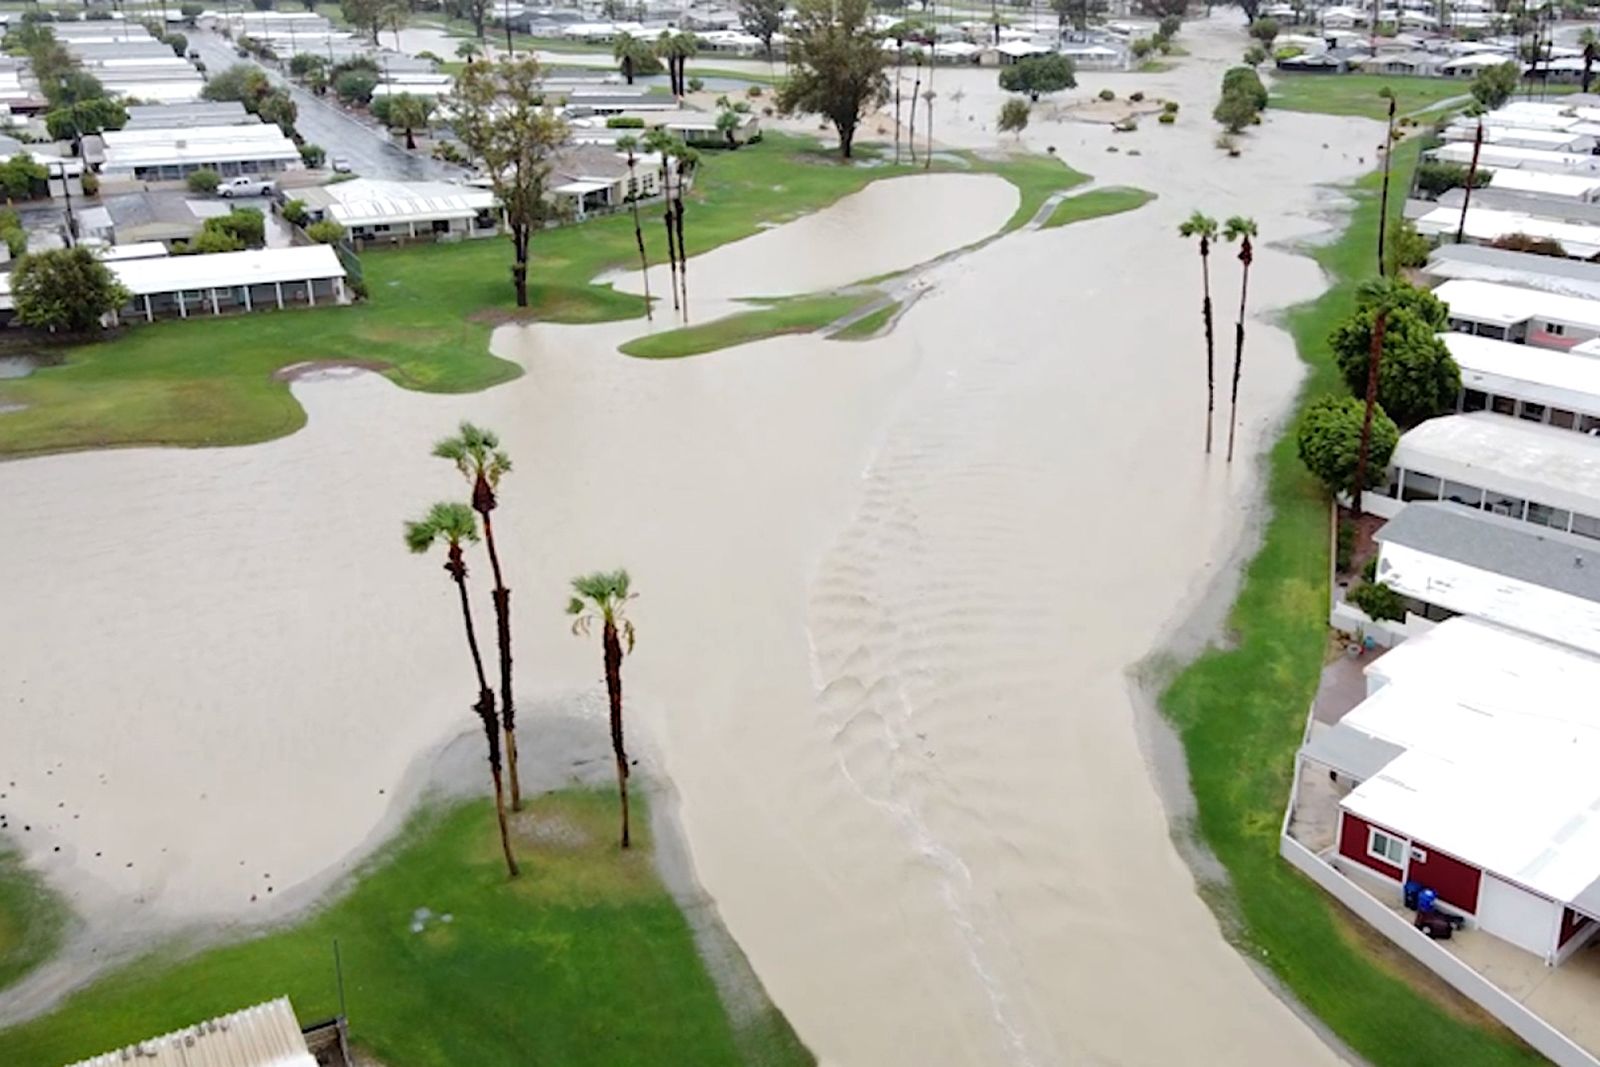 Storms cause major flooding in parts of Las Vegas